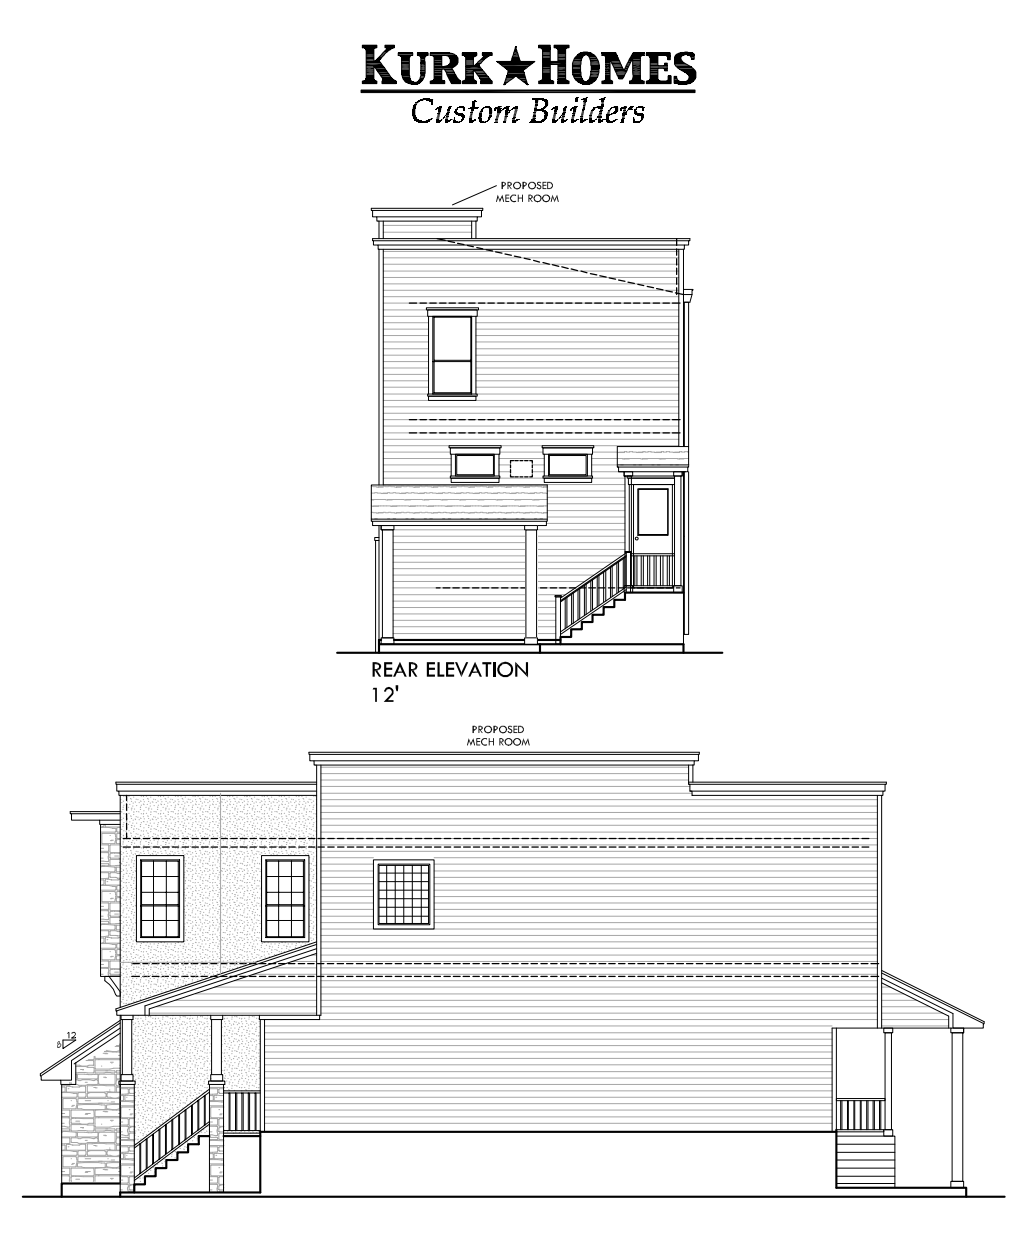 The Heights Elevation